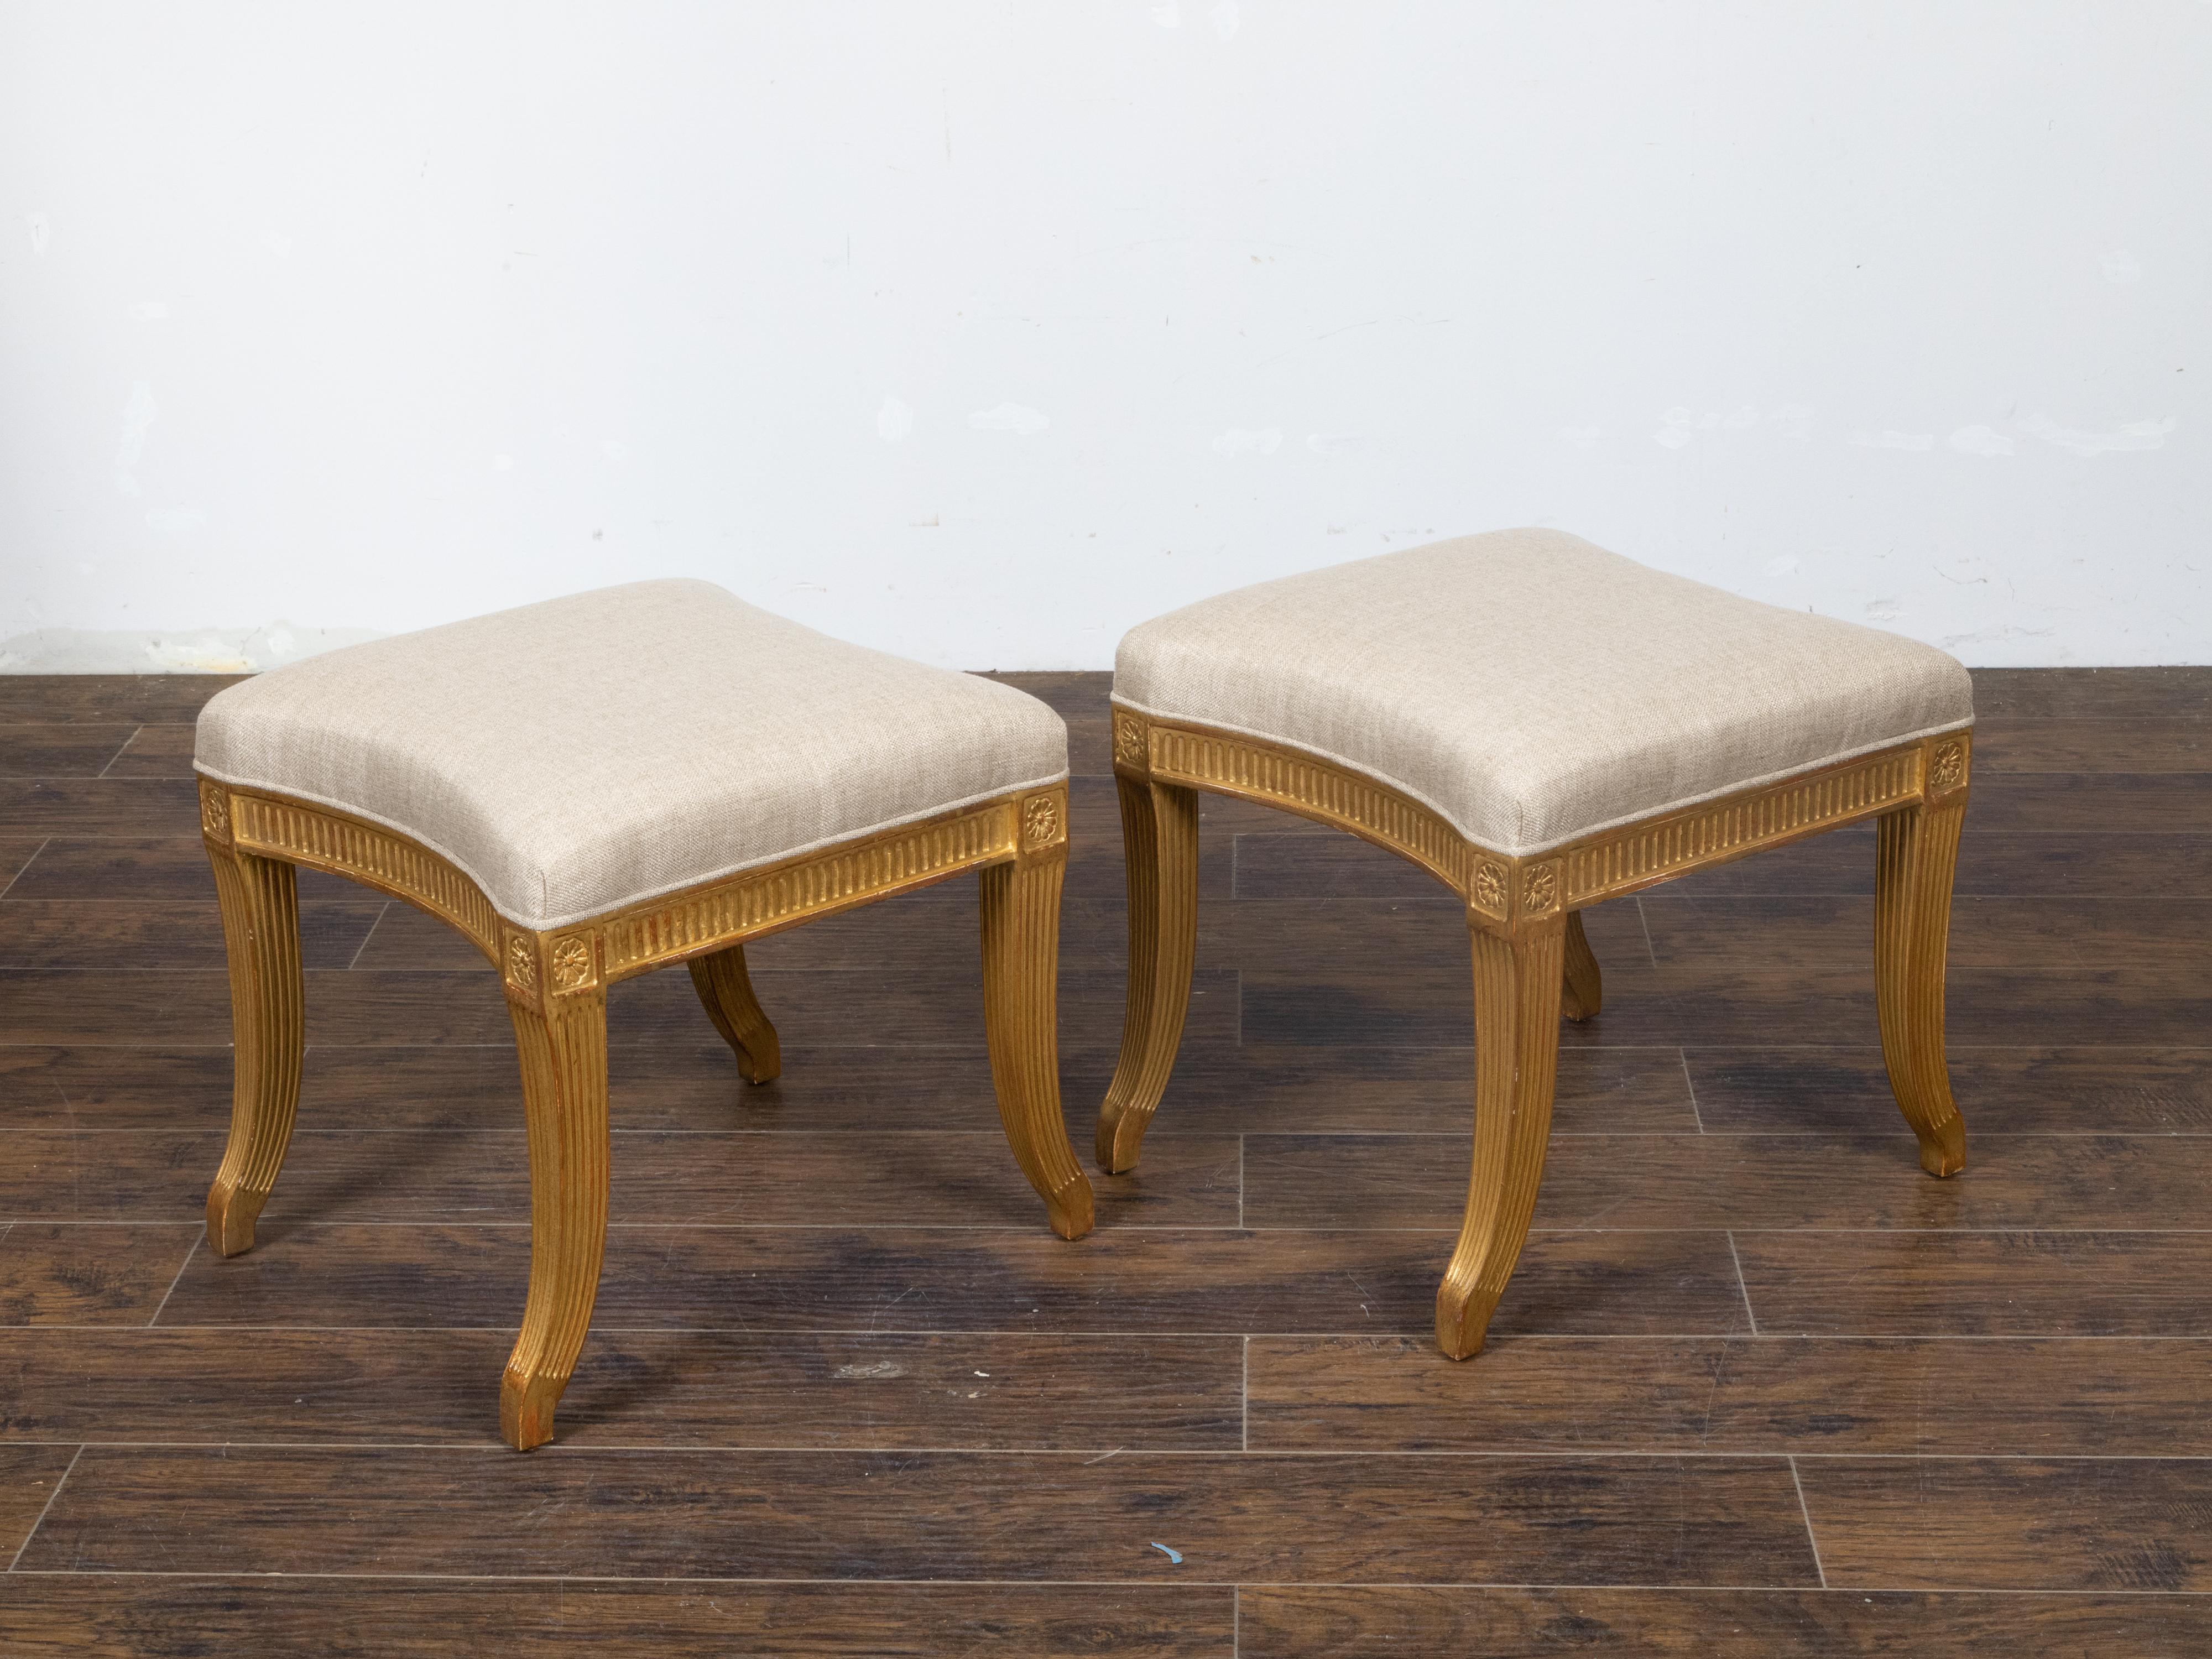 20th Century Pair of French Directoire Style Midcentury Giltwood Stools with New Upholstery For Sale